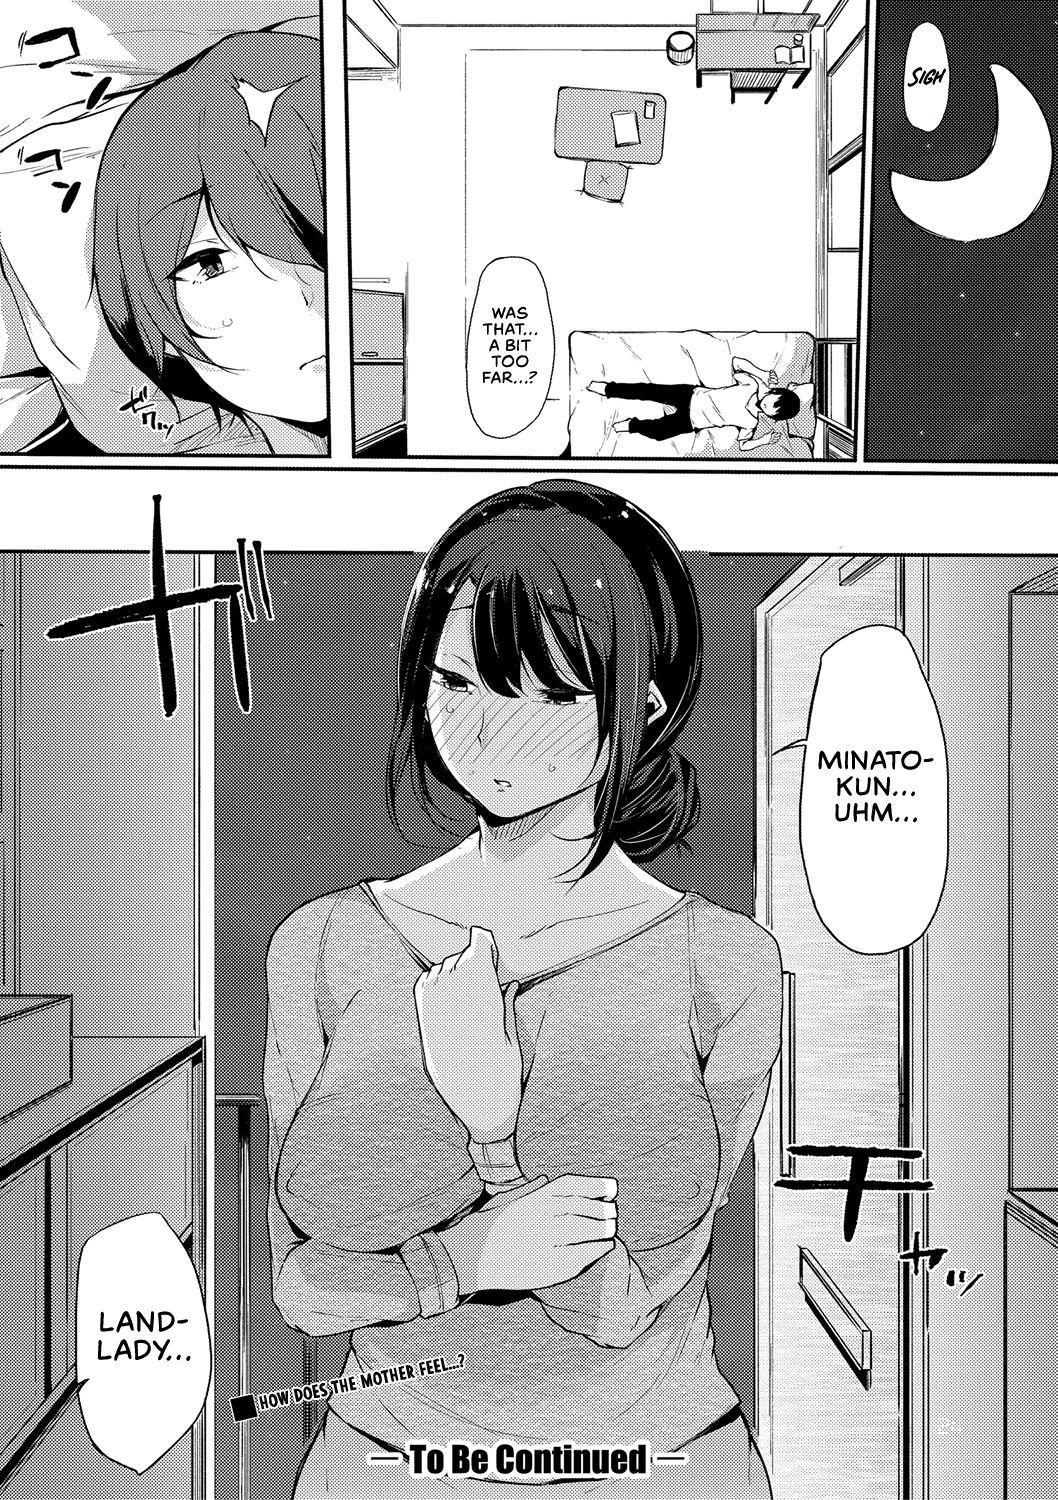 Inked Musume Nochi Haha, Tokoroniyori Shunrai Zenpen | A Daughter followed by a Mother: A spring Full of Thunders. Eat - Page 24